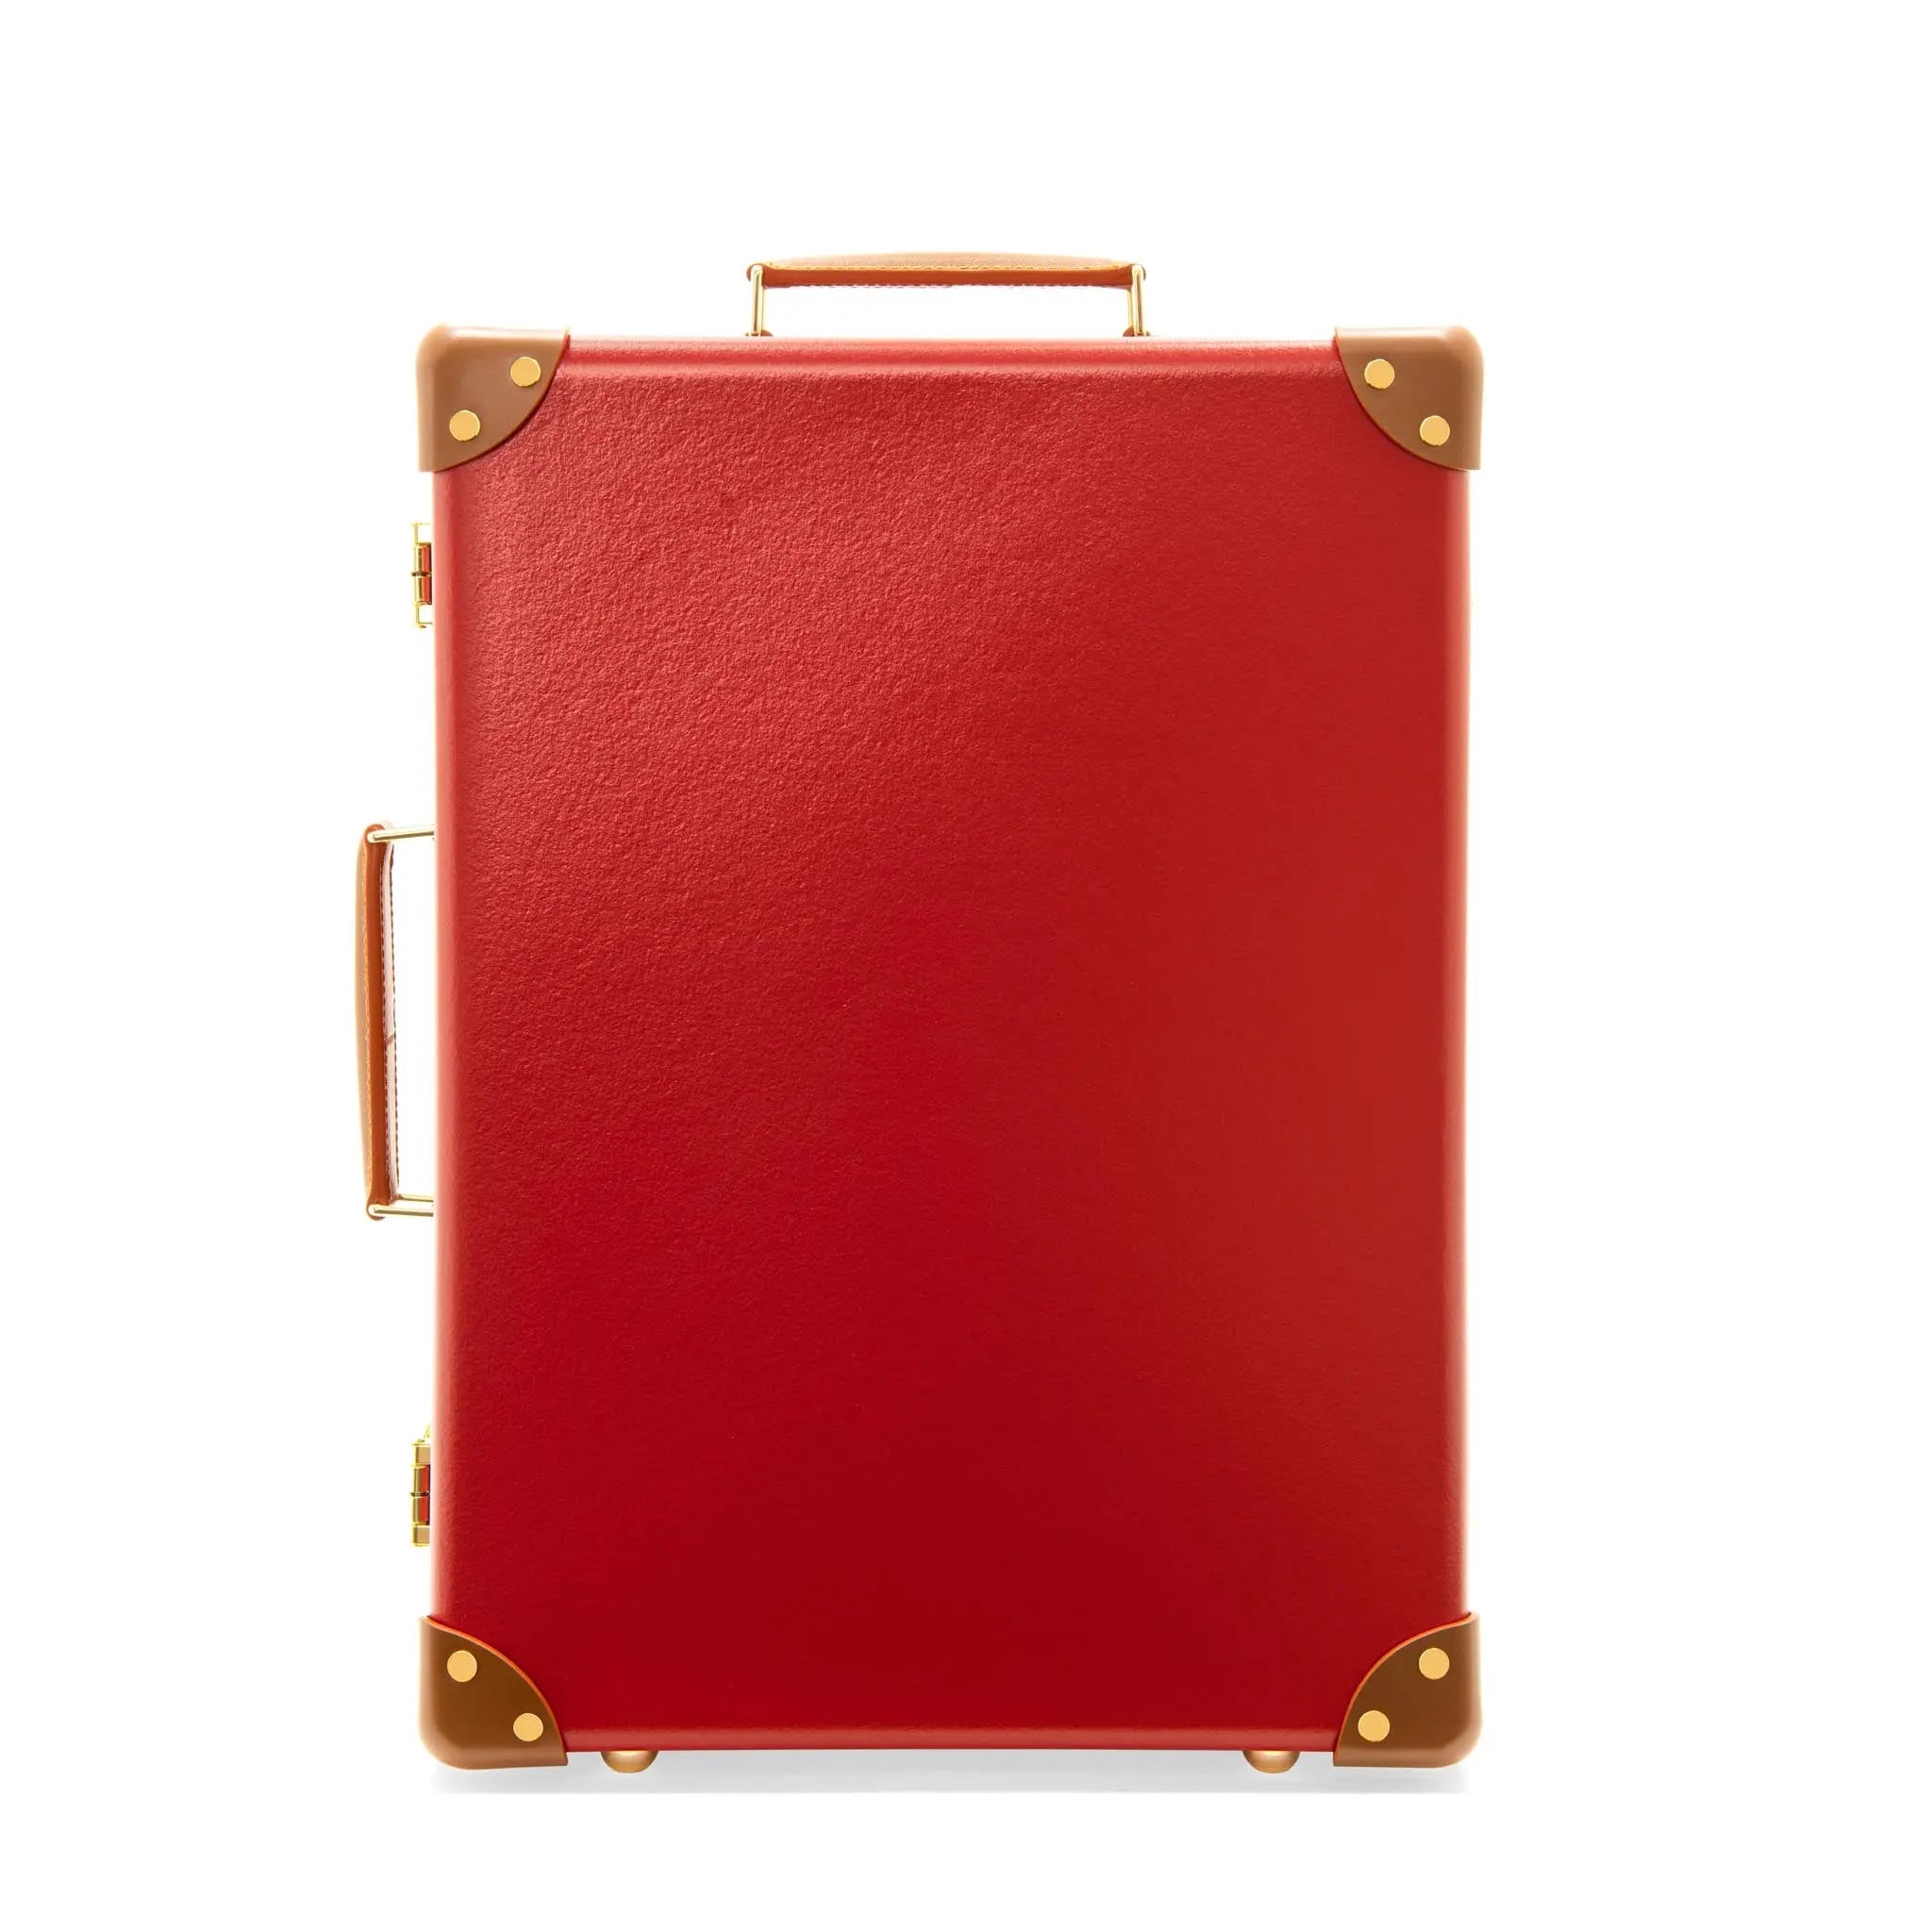 New - Centenary · Small Carry-On - 2 Wheels | Red/Caramel/Gold - GLOBE-TROTTER